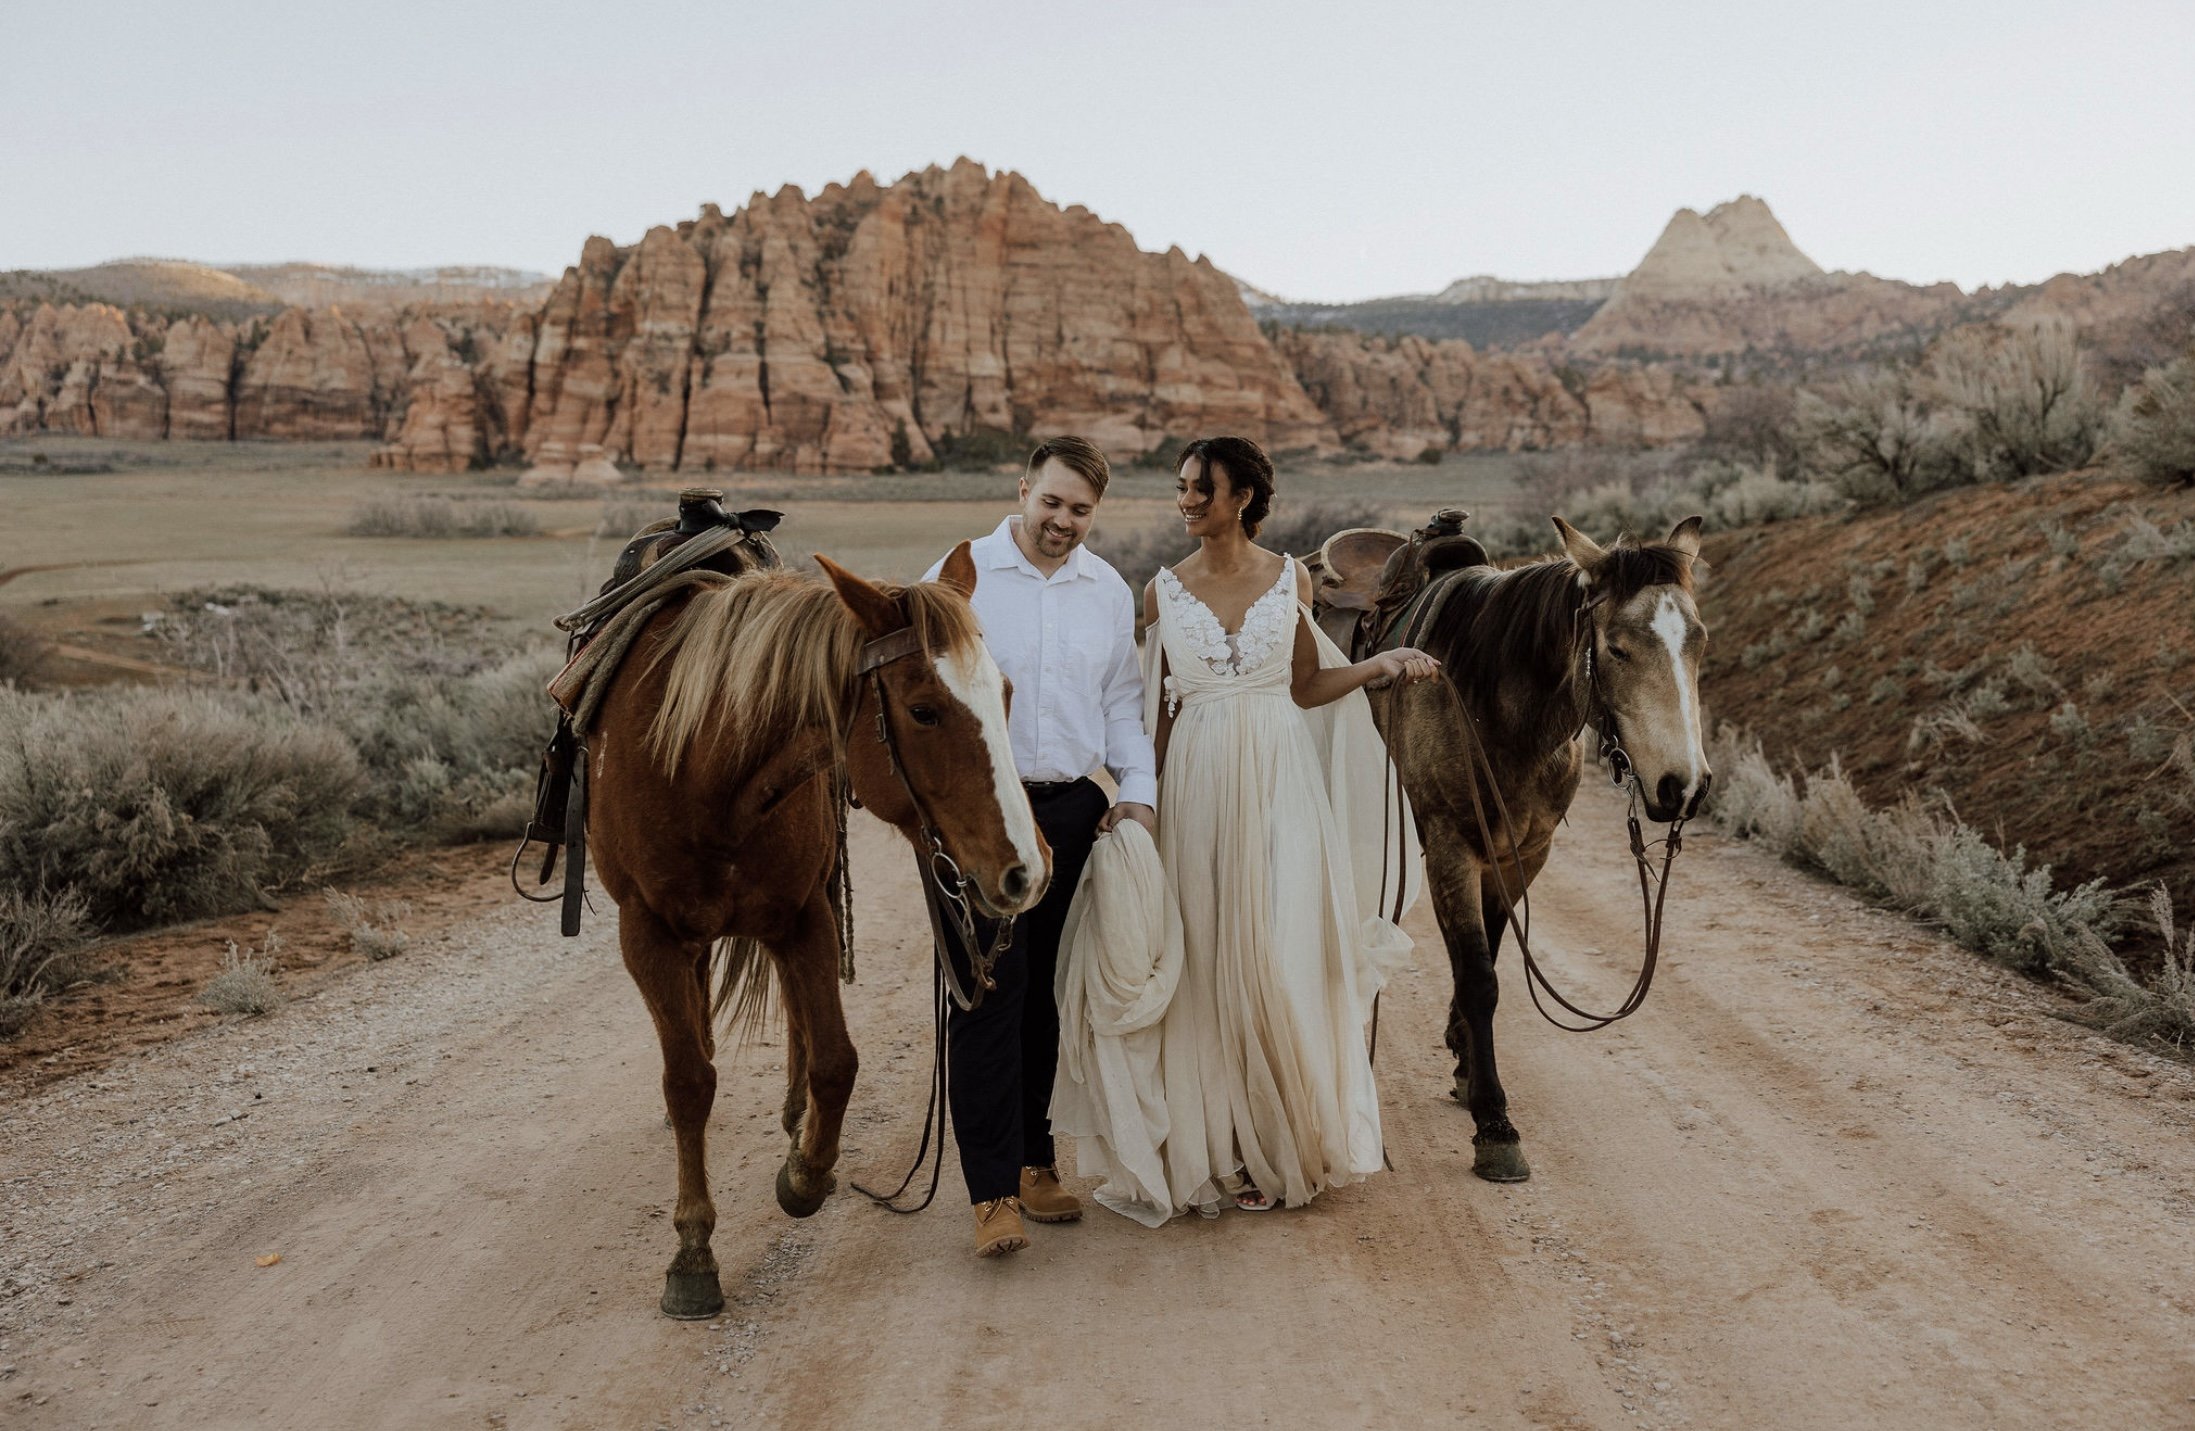   Summer wedding dress . Elopement in Zion National Park. Photo by  Abigail Traver Photography.   